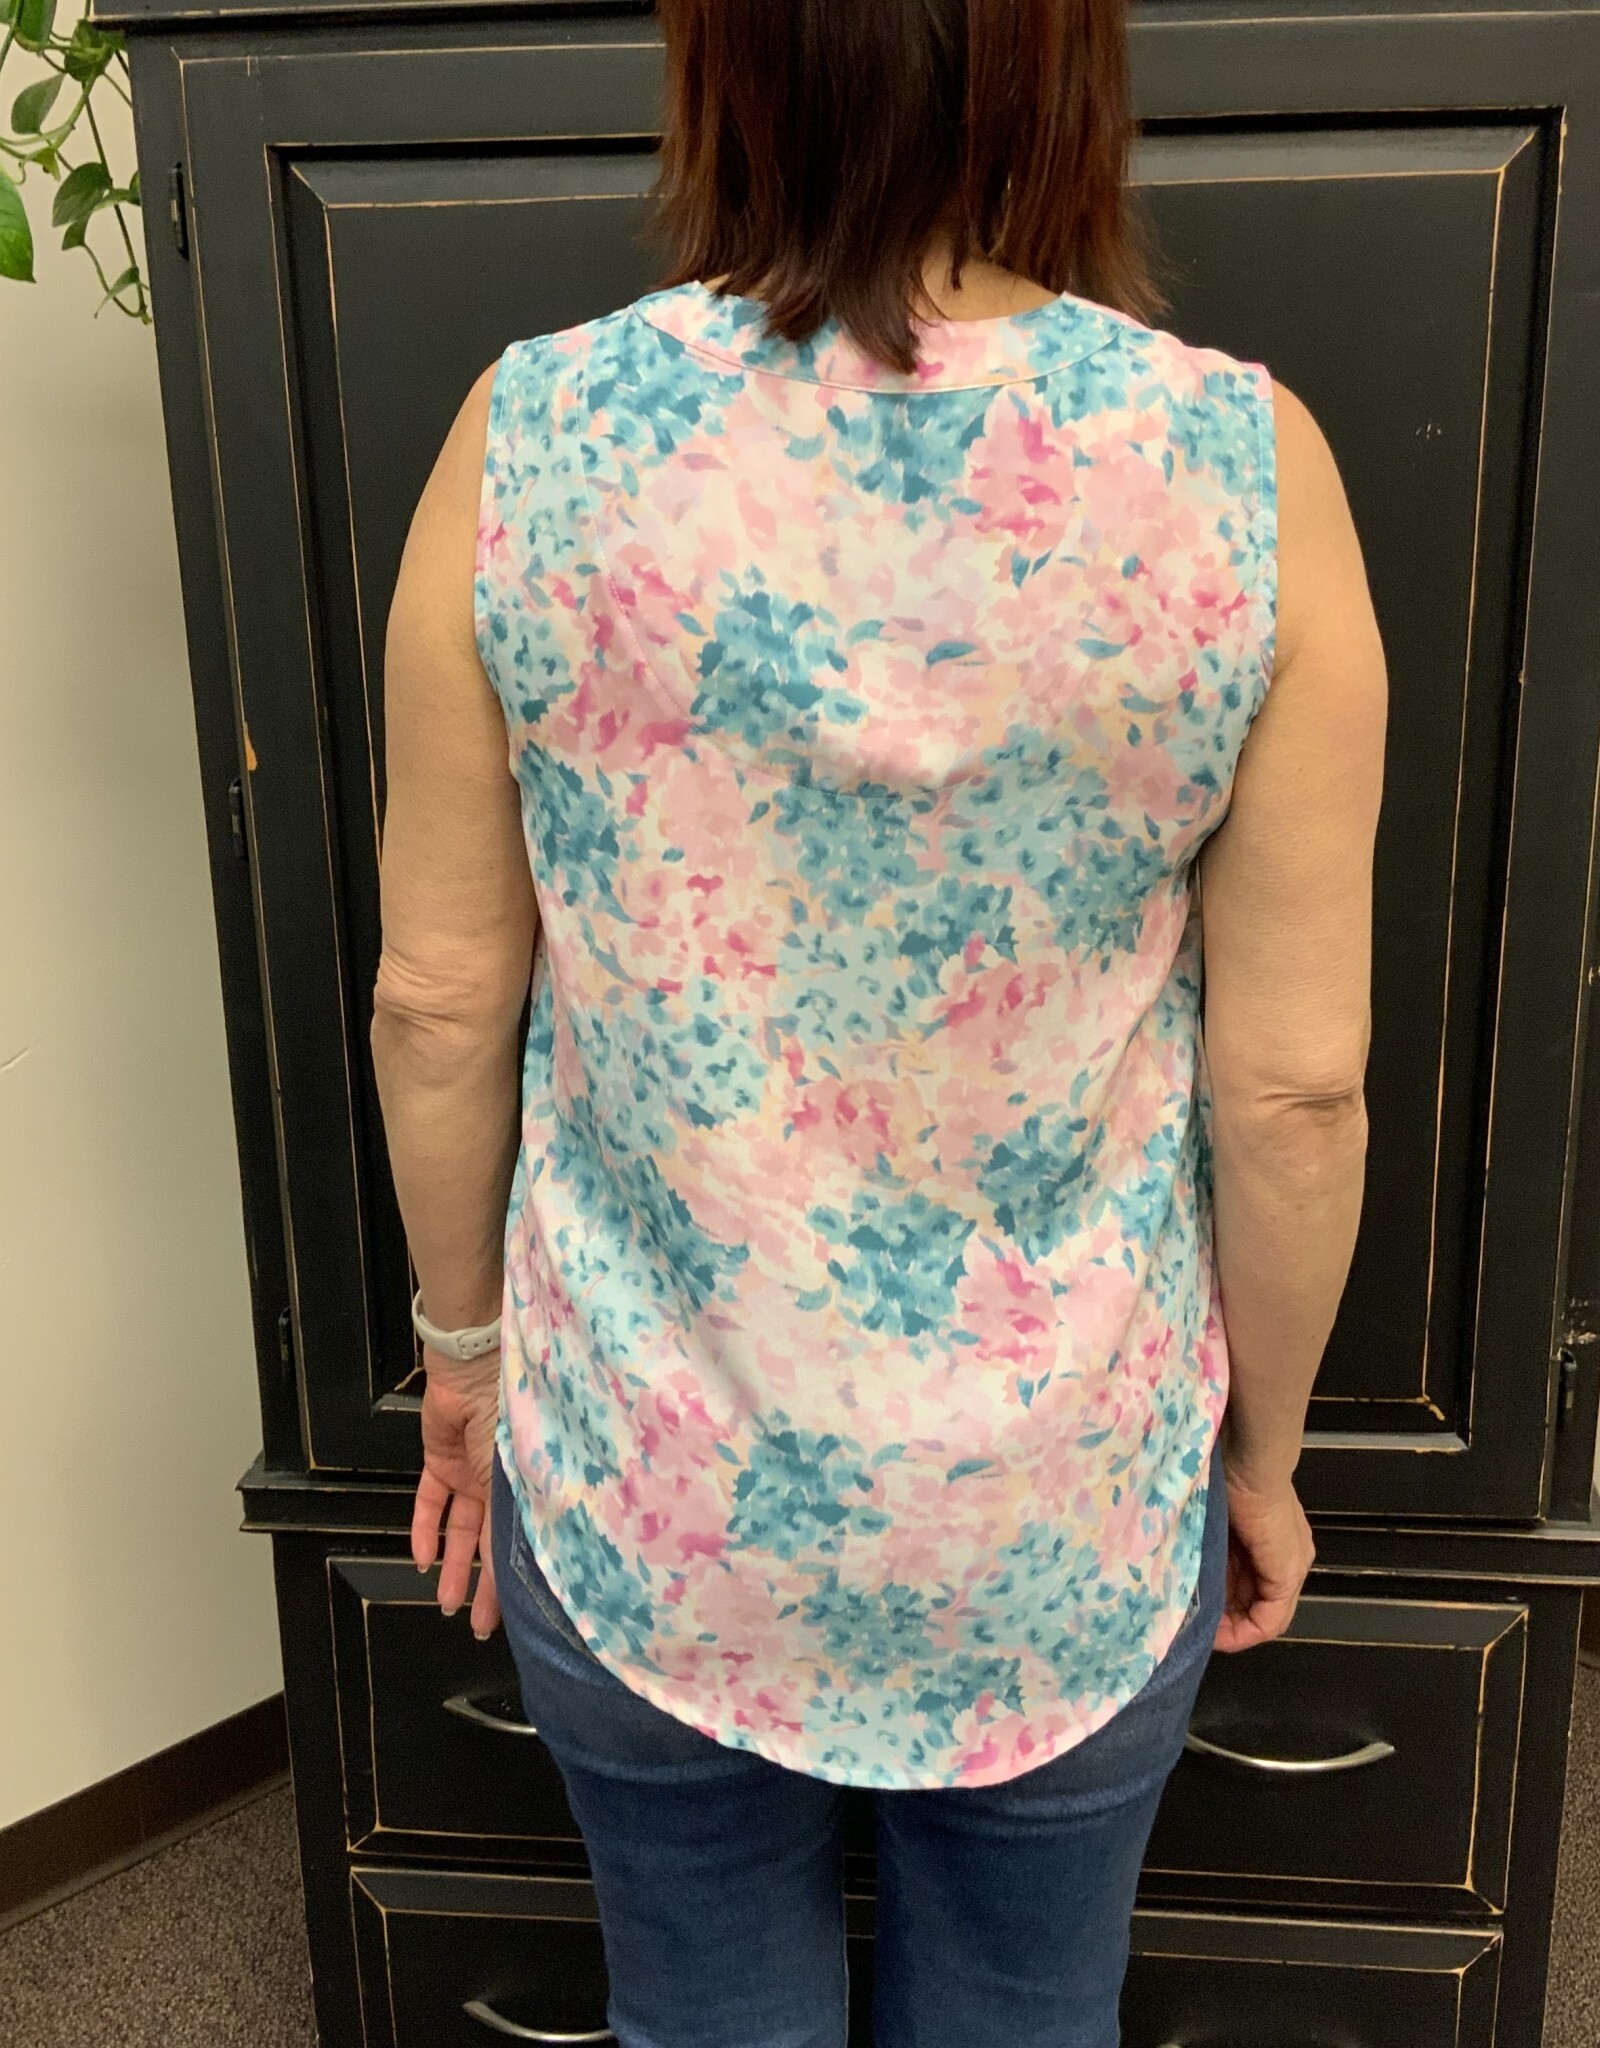 - Pink/Teal Watercolor Print Pleated V-Neck Sleeveless Top